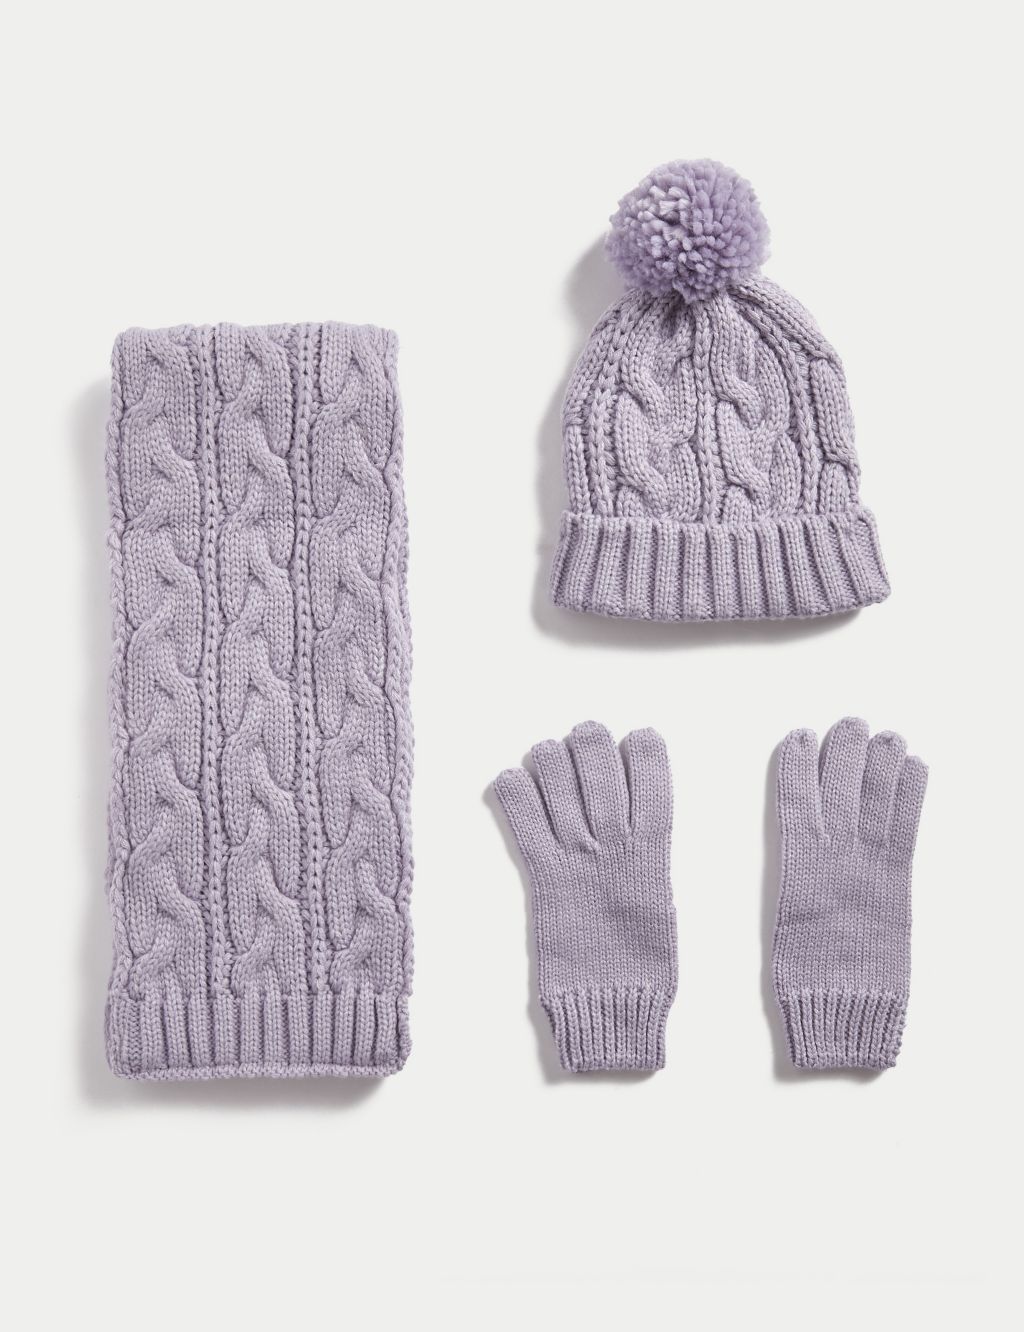 Scarf and hat set